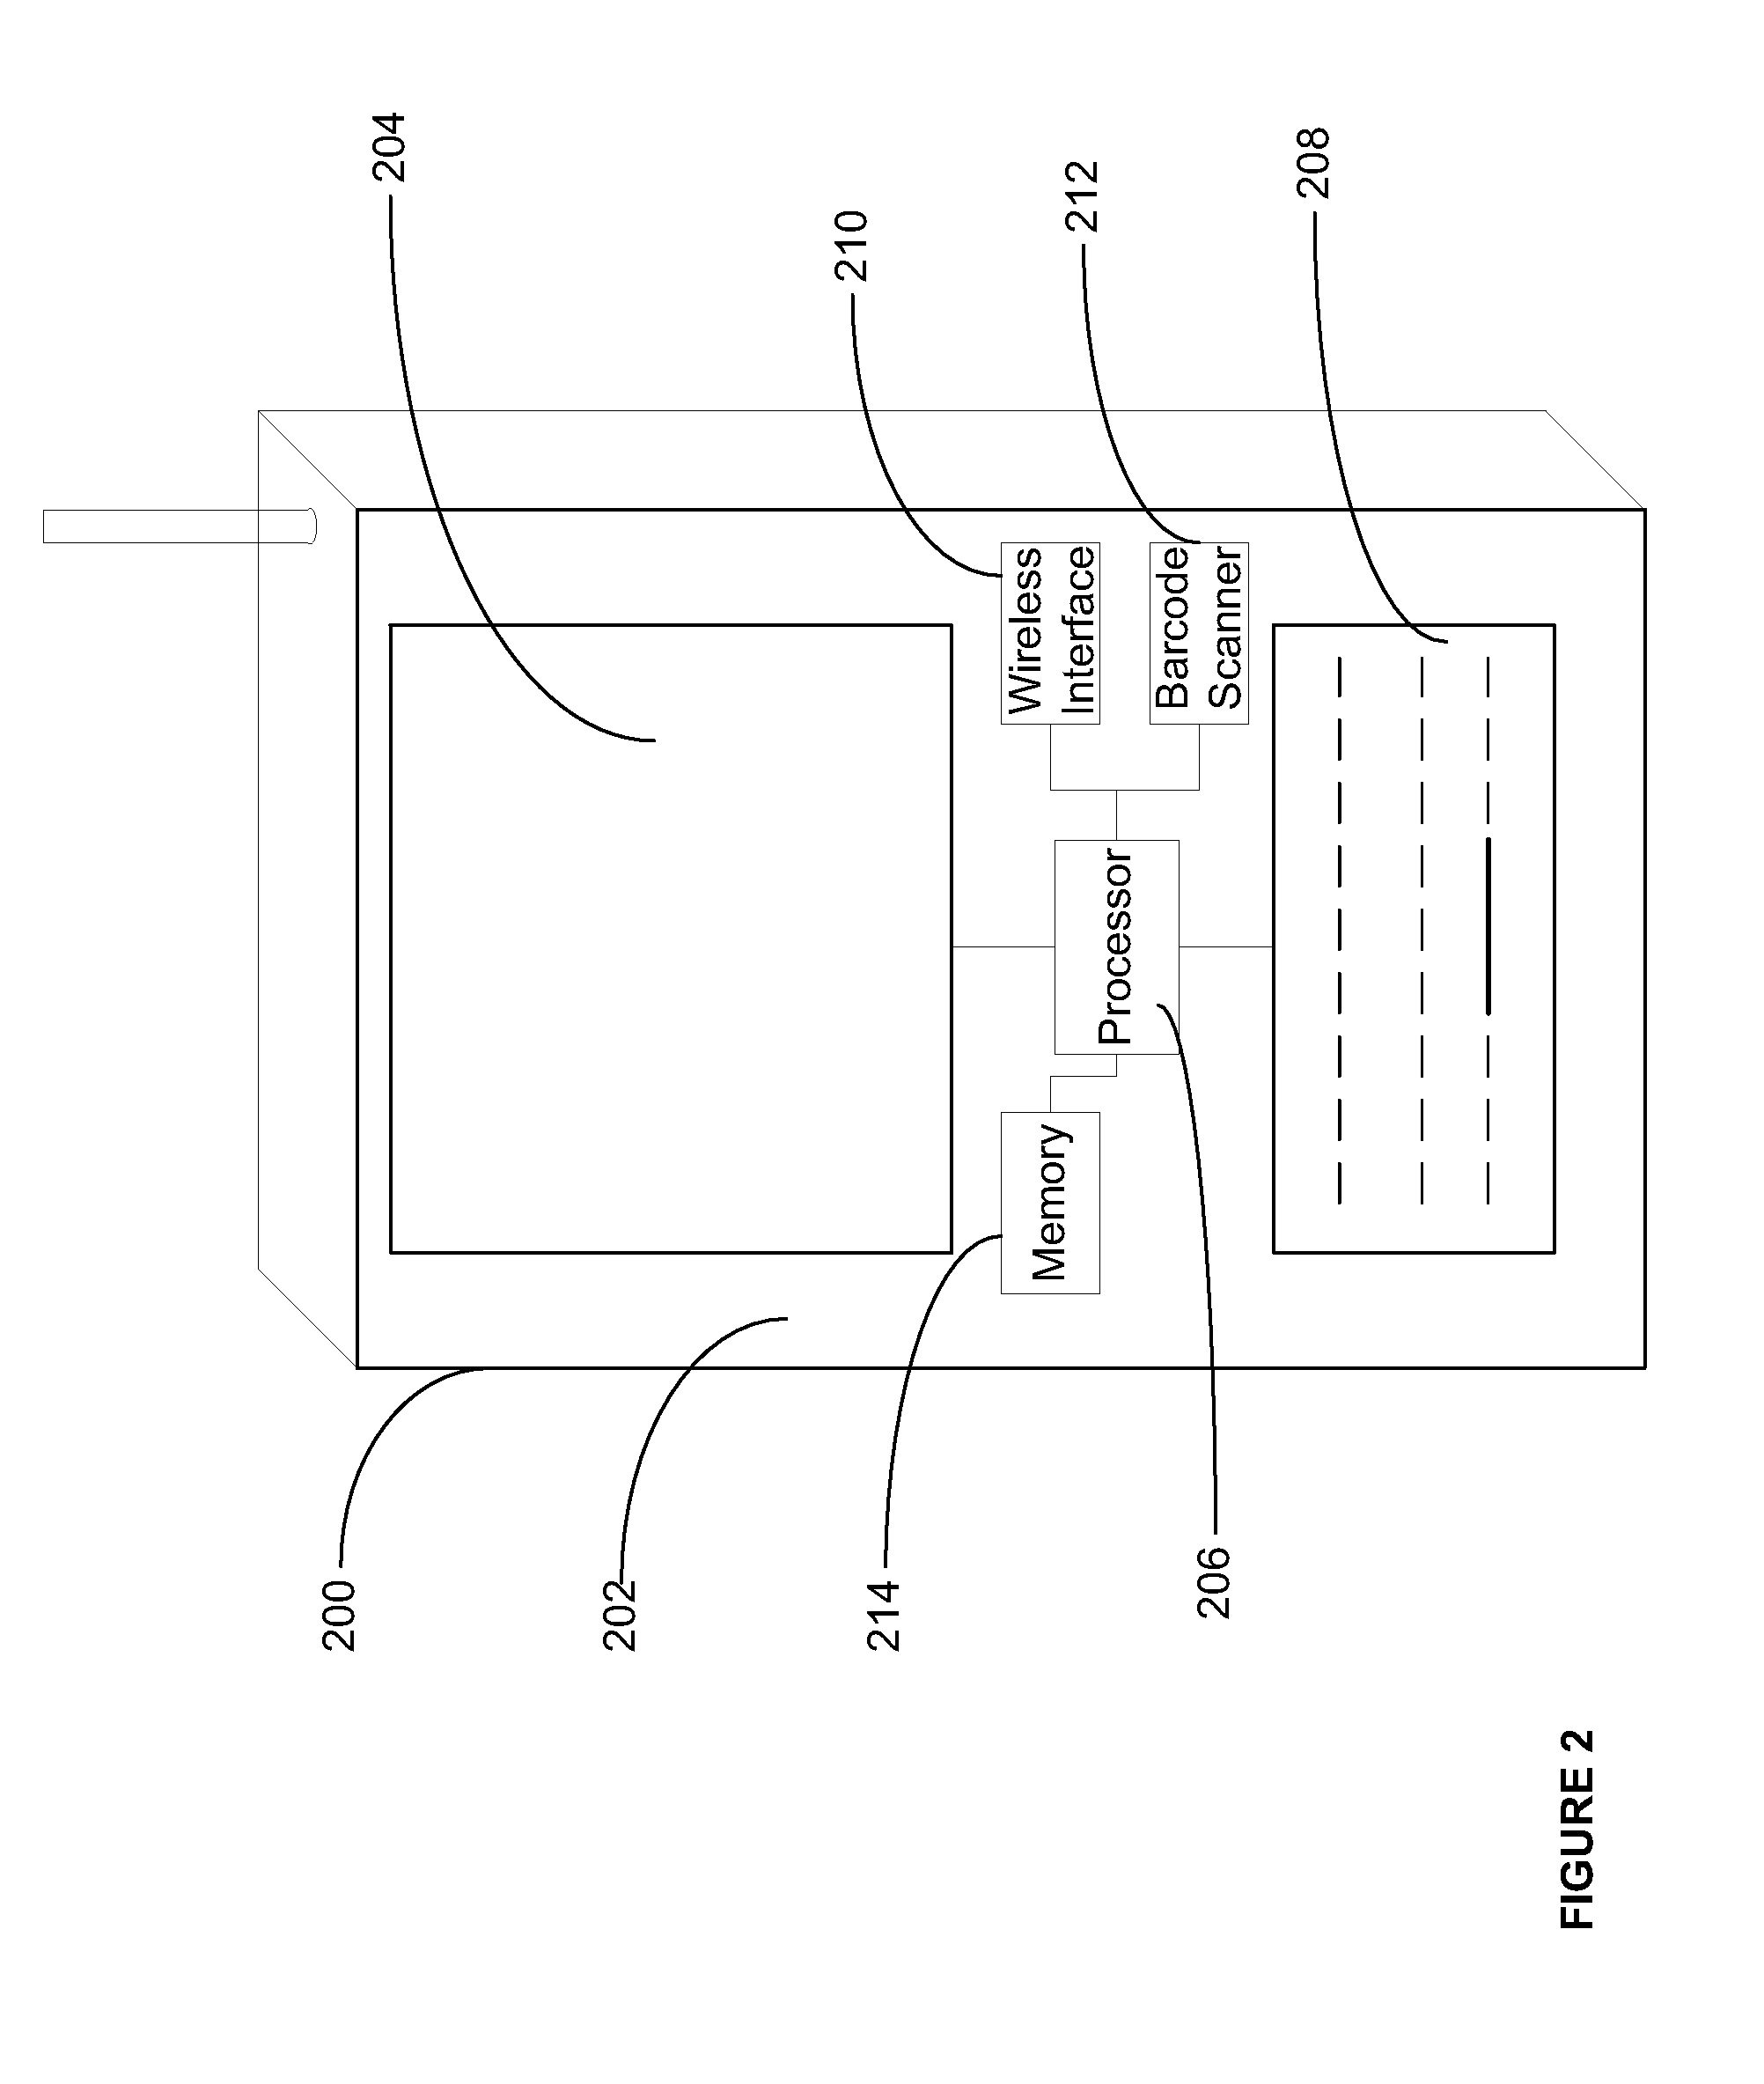 Mobile workforce management apparatus and method